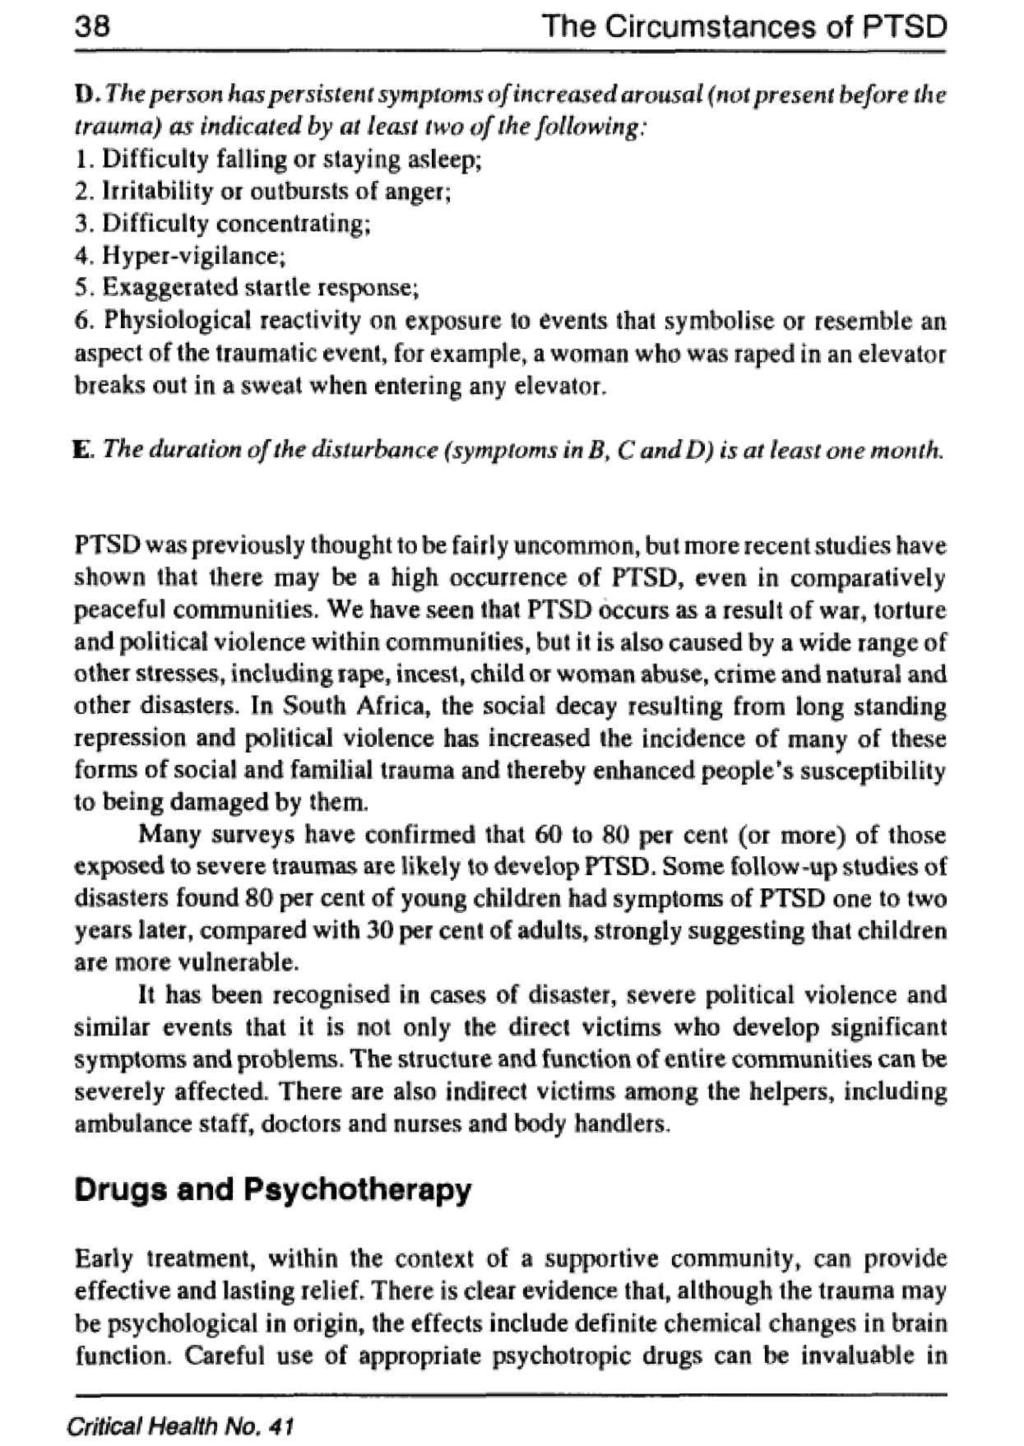 38 The Circumstances of PTSD Critical Health No, 41 D. The person has persistent symptoms of increased arousal {not present before the trauma) as indicated by at least two of the following; 1.